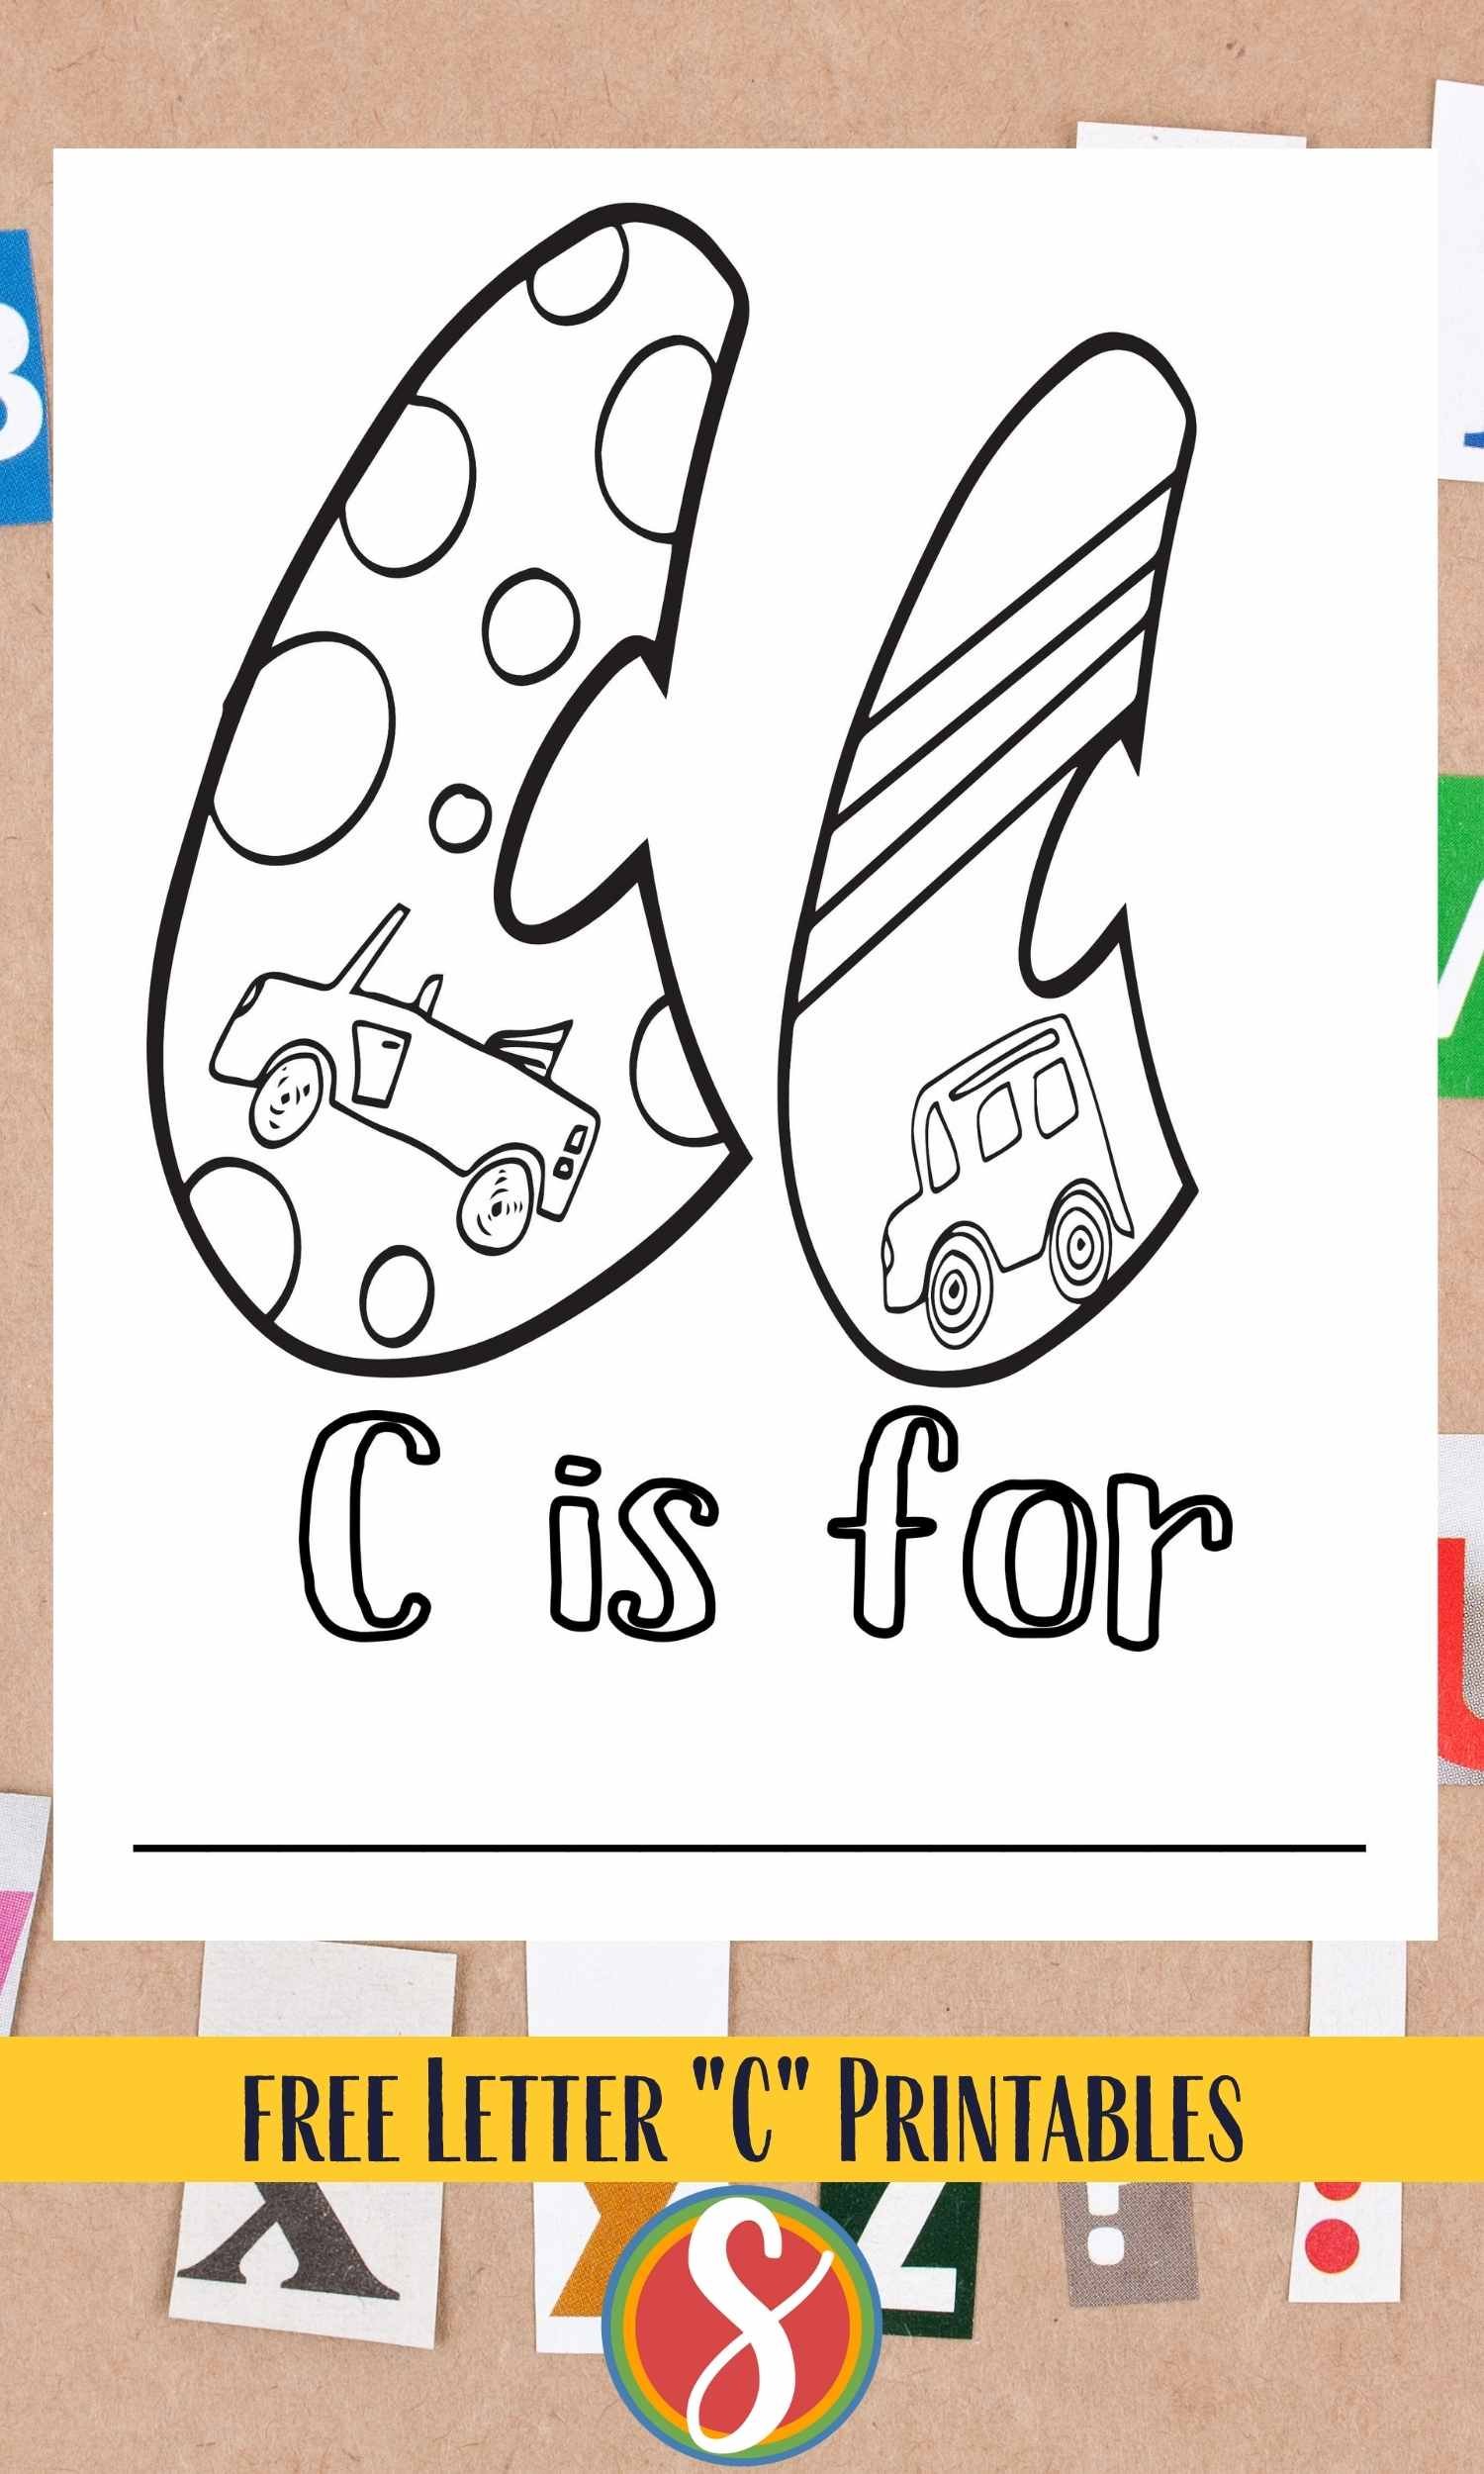 Bubble letter c's, one big one small, cars drawn inside to color